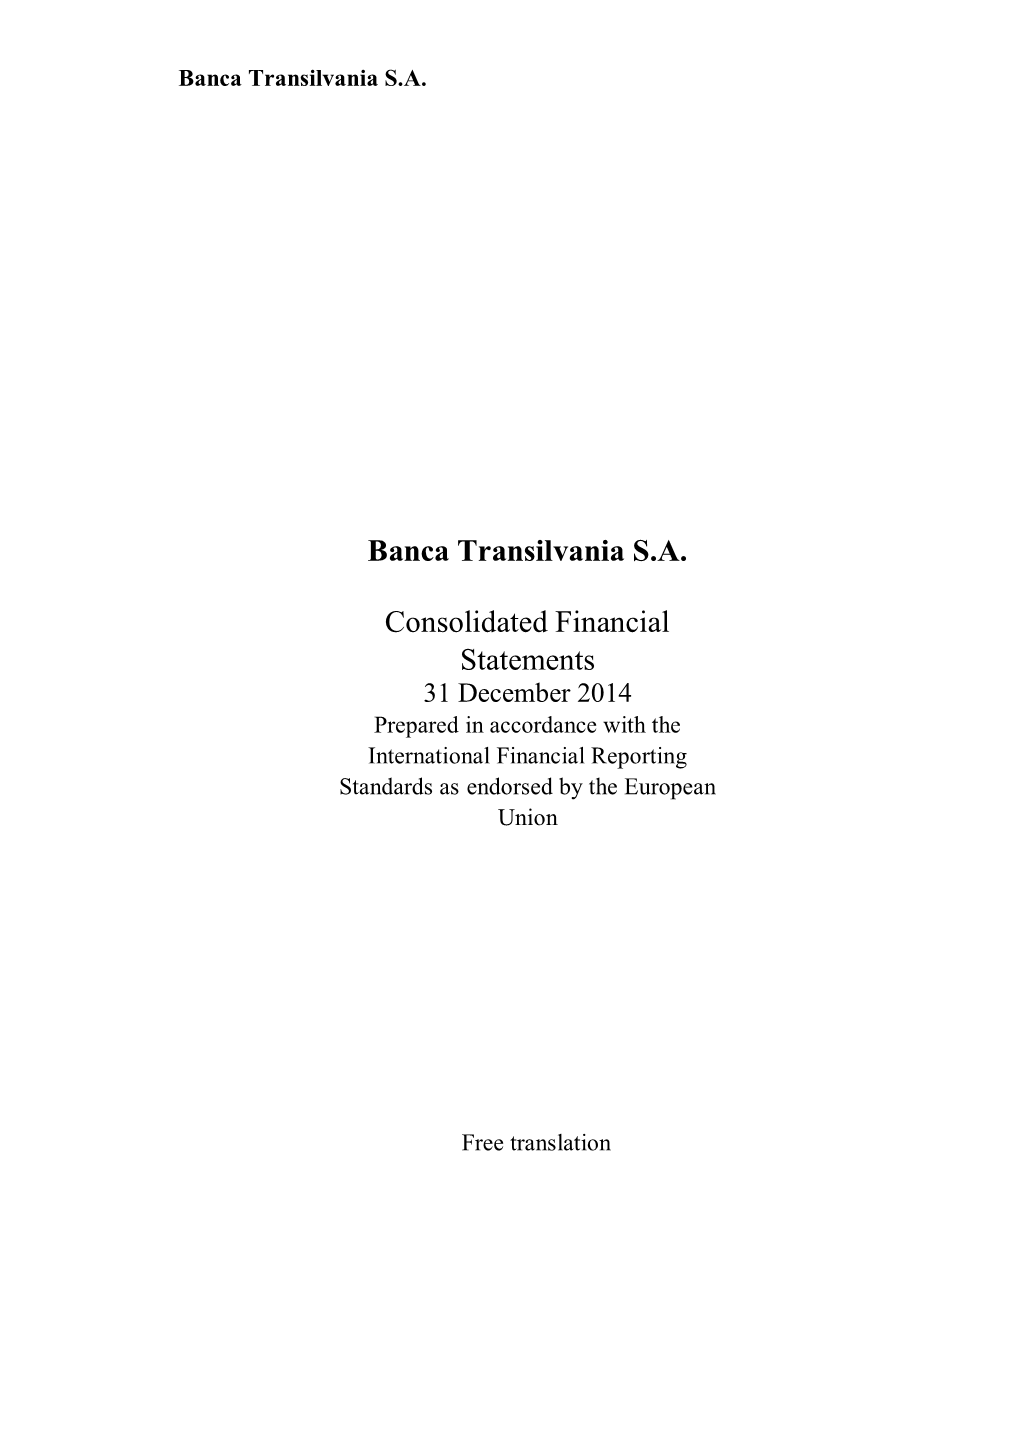 Banca Transilvania S.A. Consolidated Financial Statements